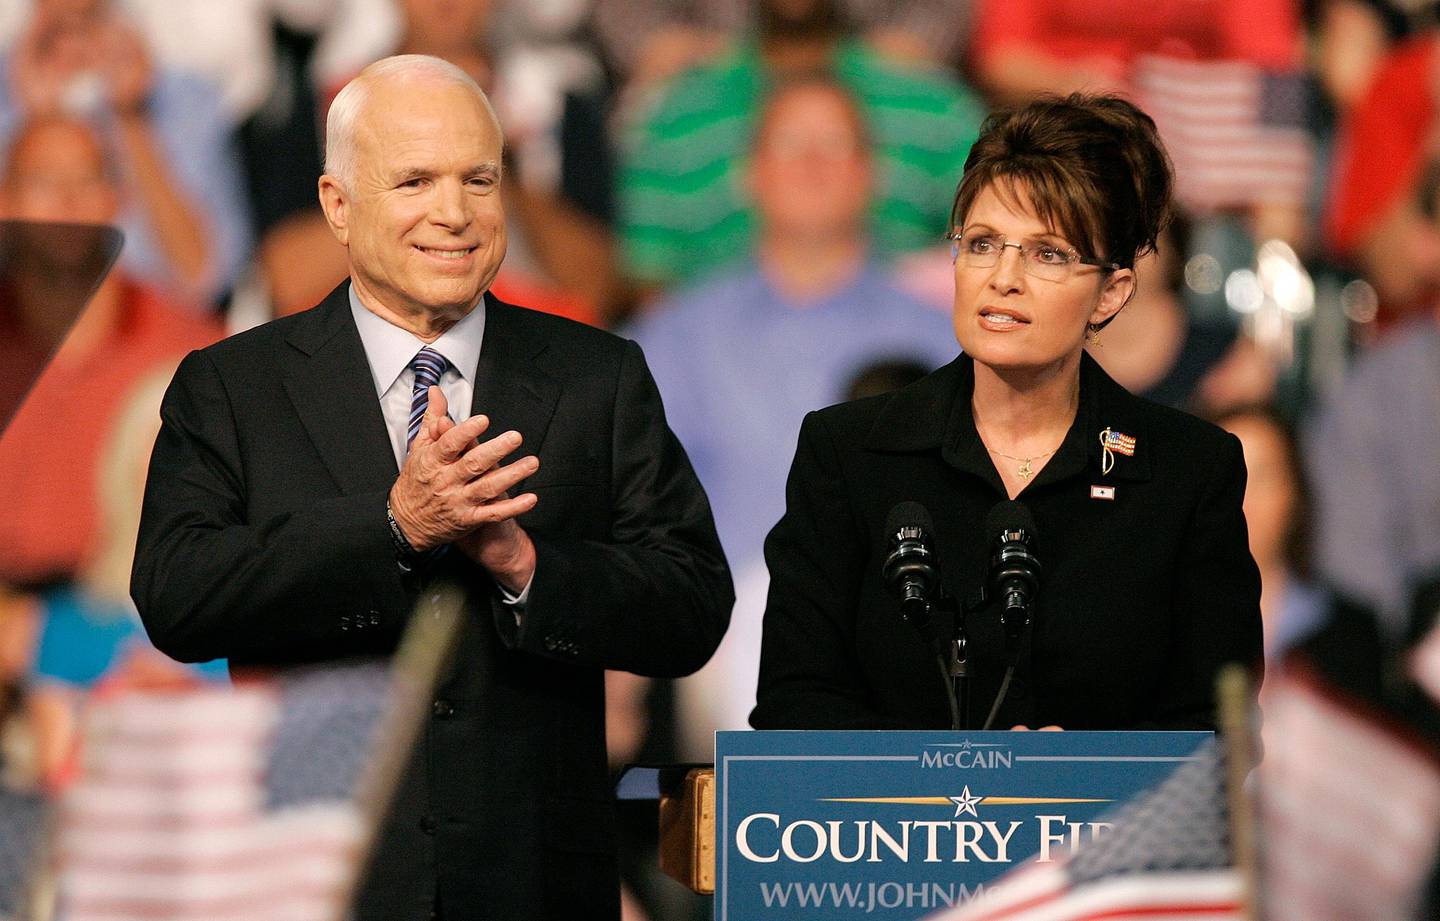 FILE - In this Aug. 29, 2008, file photo, Republican Alaska Gov. Sarah Palin, right, delivers a speech as Republican presidential candidate, Sen. John McCain, R-Ariz., introduces her as his vice presidential running mate at Wright State University's Ervin J. Nutter Center in Dayton, Ohio. Eight years after stumping across the nation as the Republican Party's presidential candidate, McCain is back on the campaign trail in his home state as he faces a primary challenge and a strong Democratic opponent, State Sen. Kelli Ward, in the general election. (AP Photo/Kiichiro Sato, File)